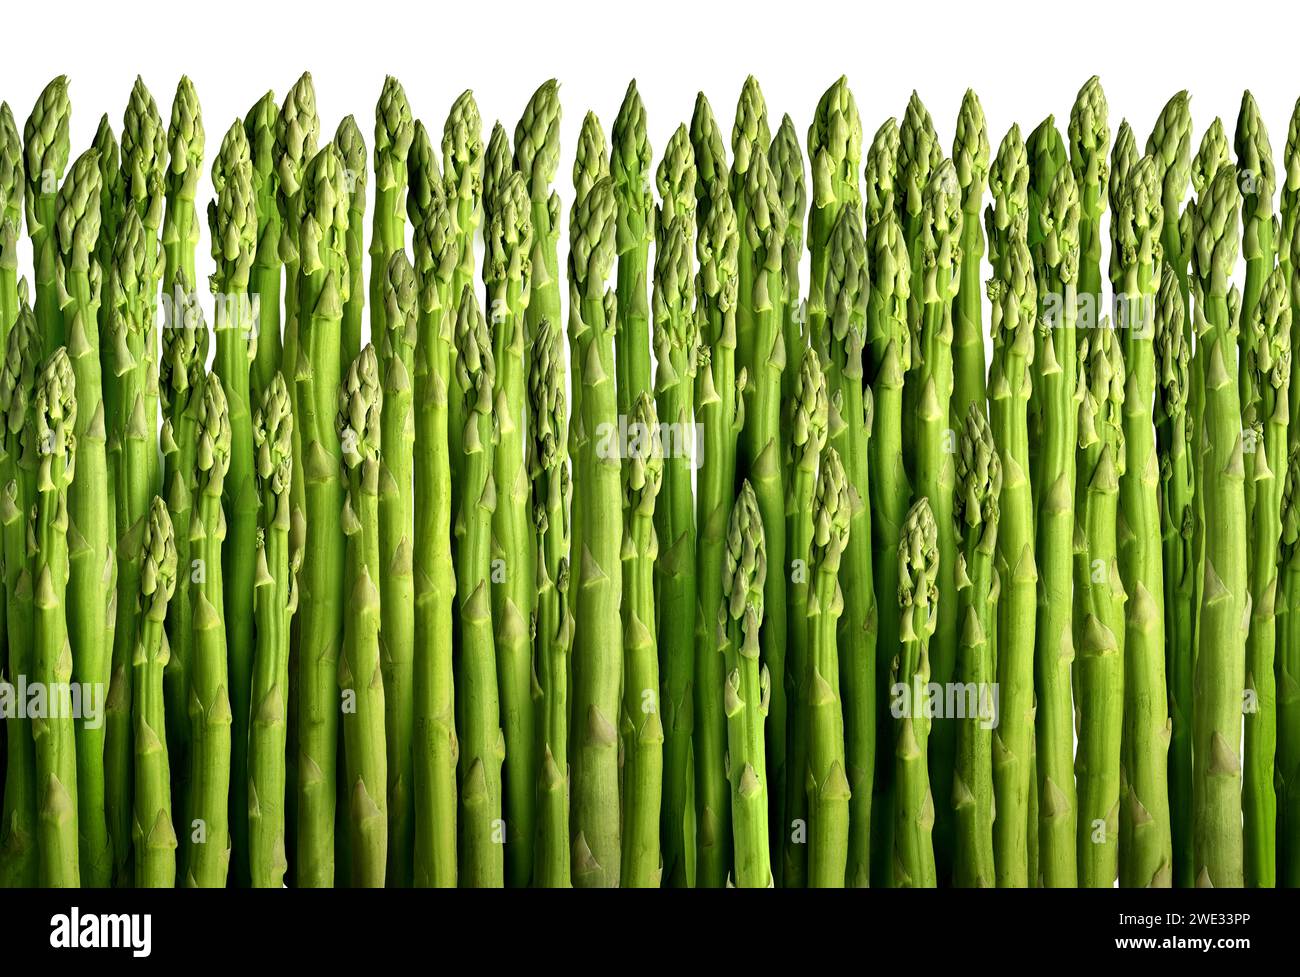 Asparagus Background as green cultivated or wild vegetables representing healthy fresh harvest of perennial vegetables crop for side dish cooking and Stock Photo